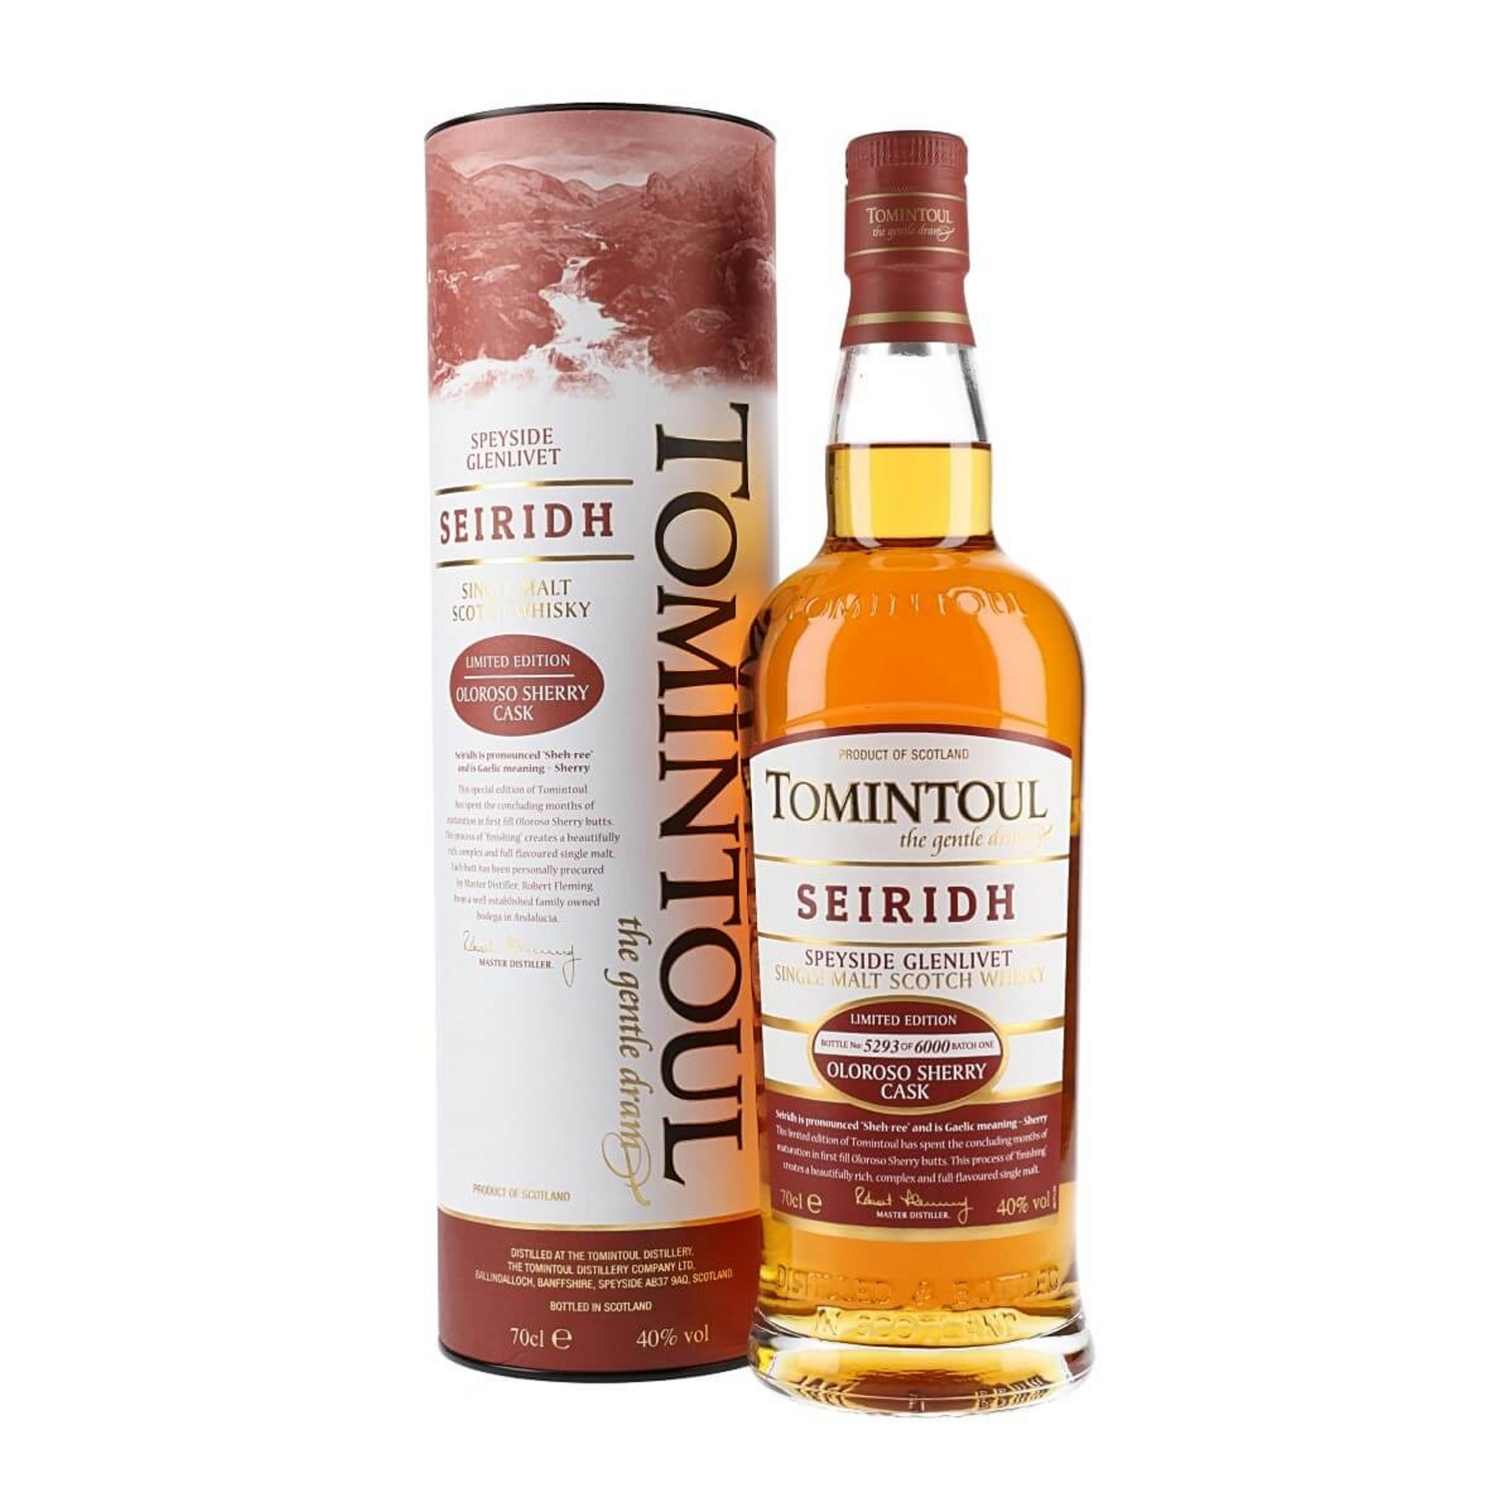 Tomintoul Seiridh Whisky